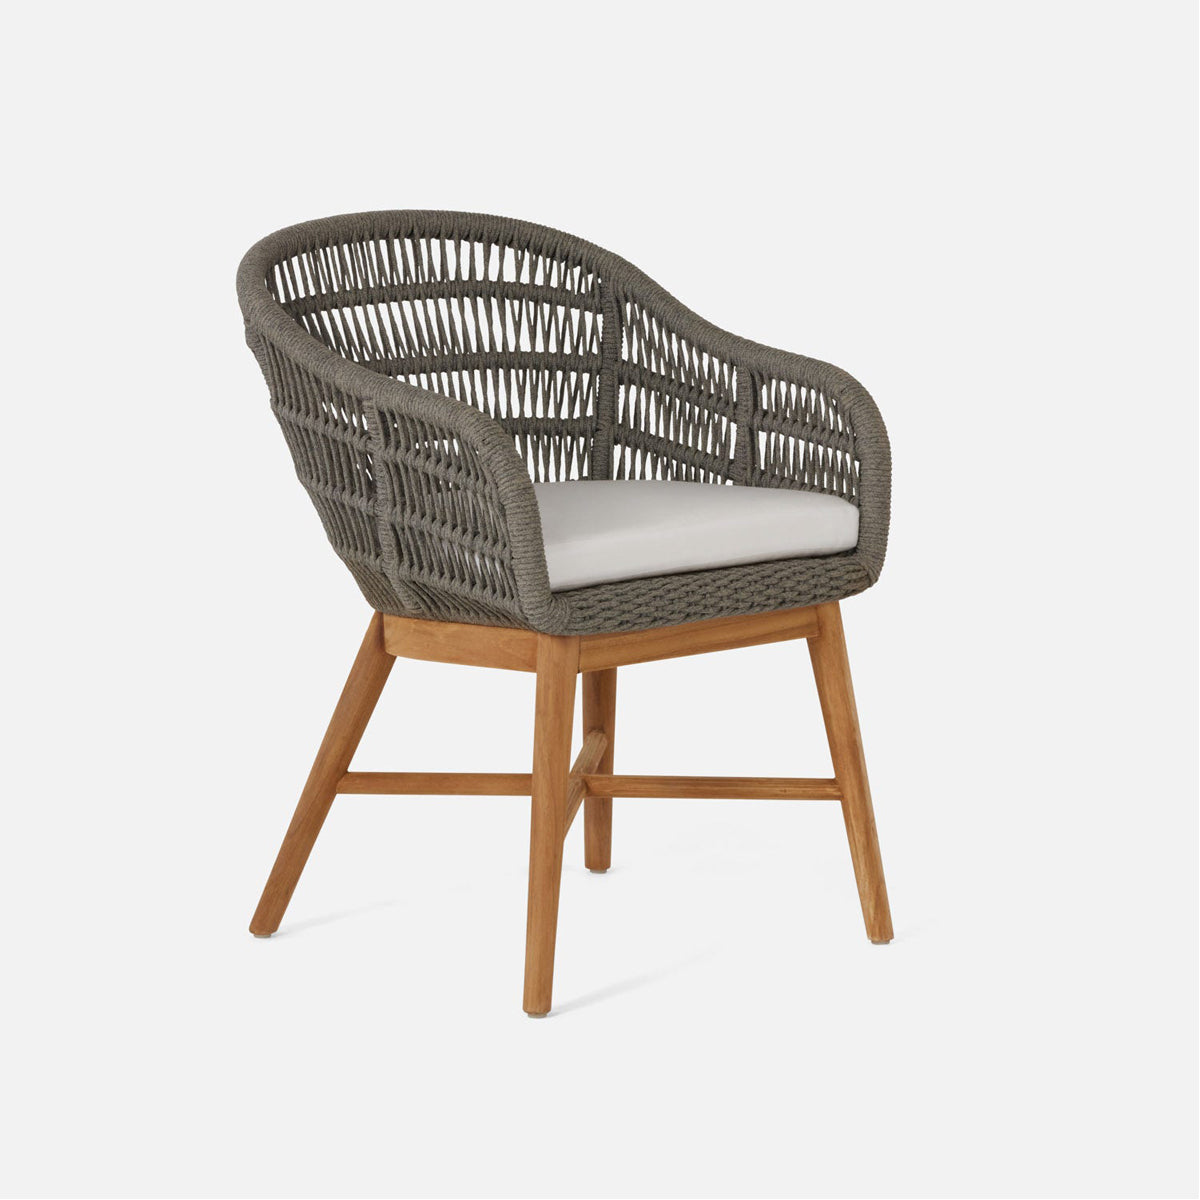 Made Goods Jolie Teak Outdoor Dining Chair in Pagua Fabric